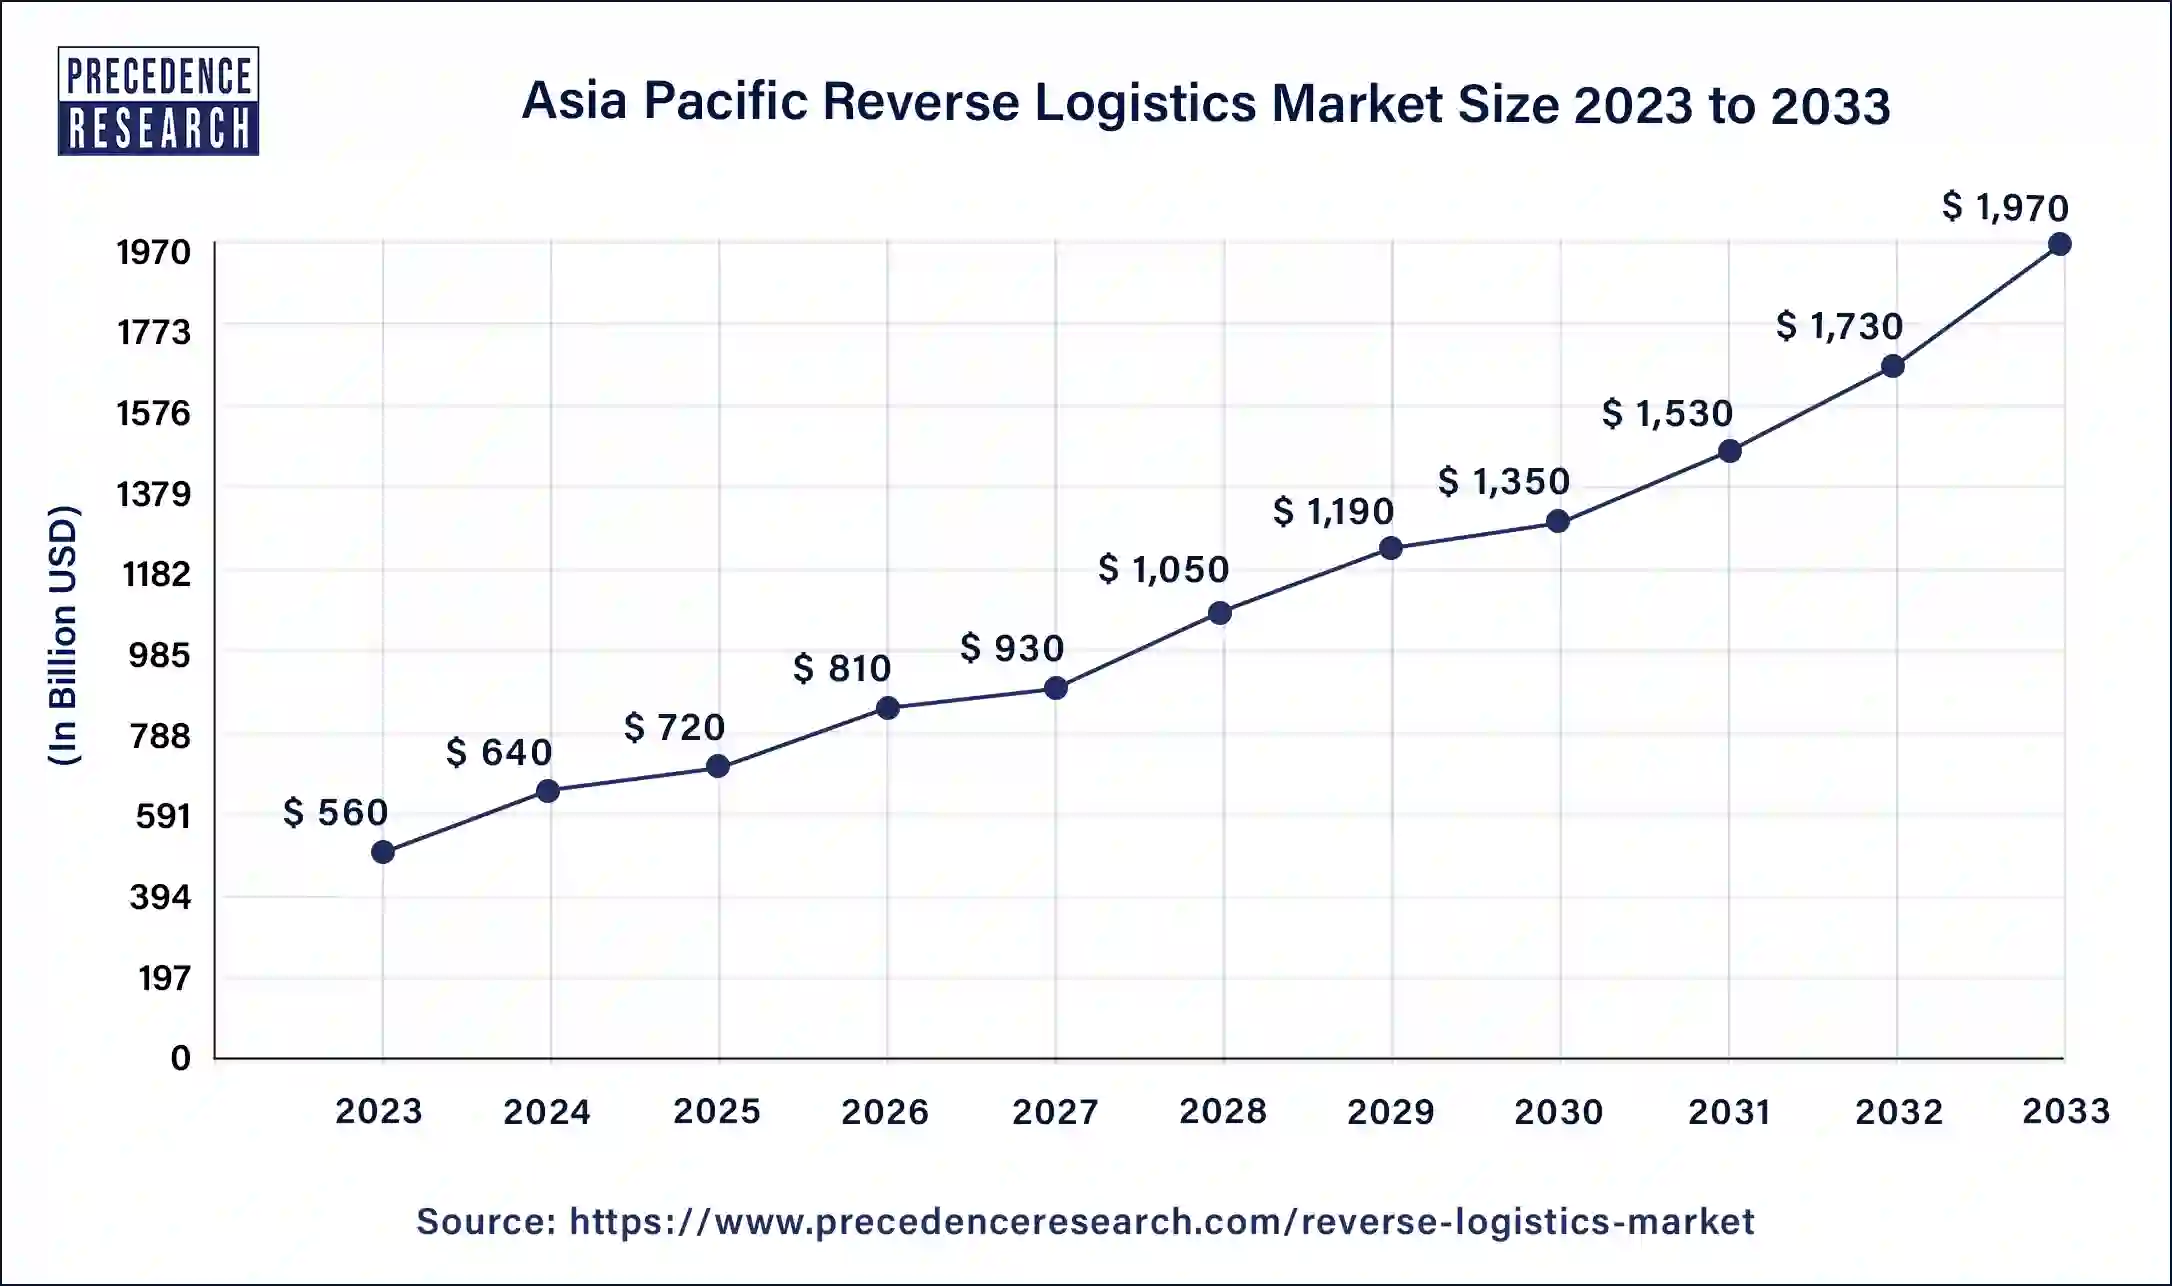 Asia Pacific Reverse Logistics Market Size 2024 to 2033